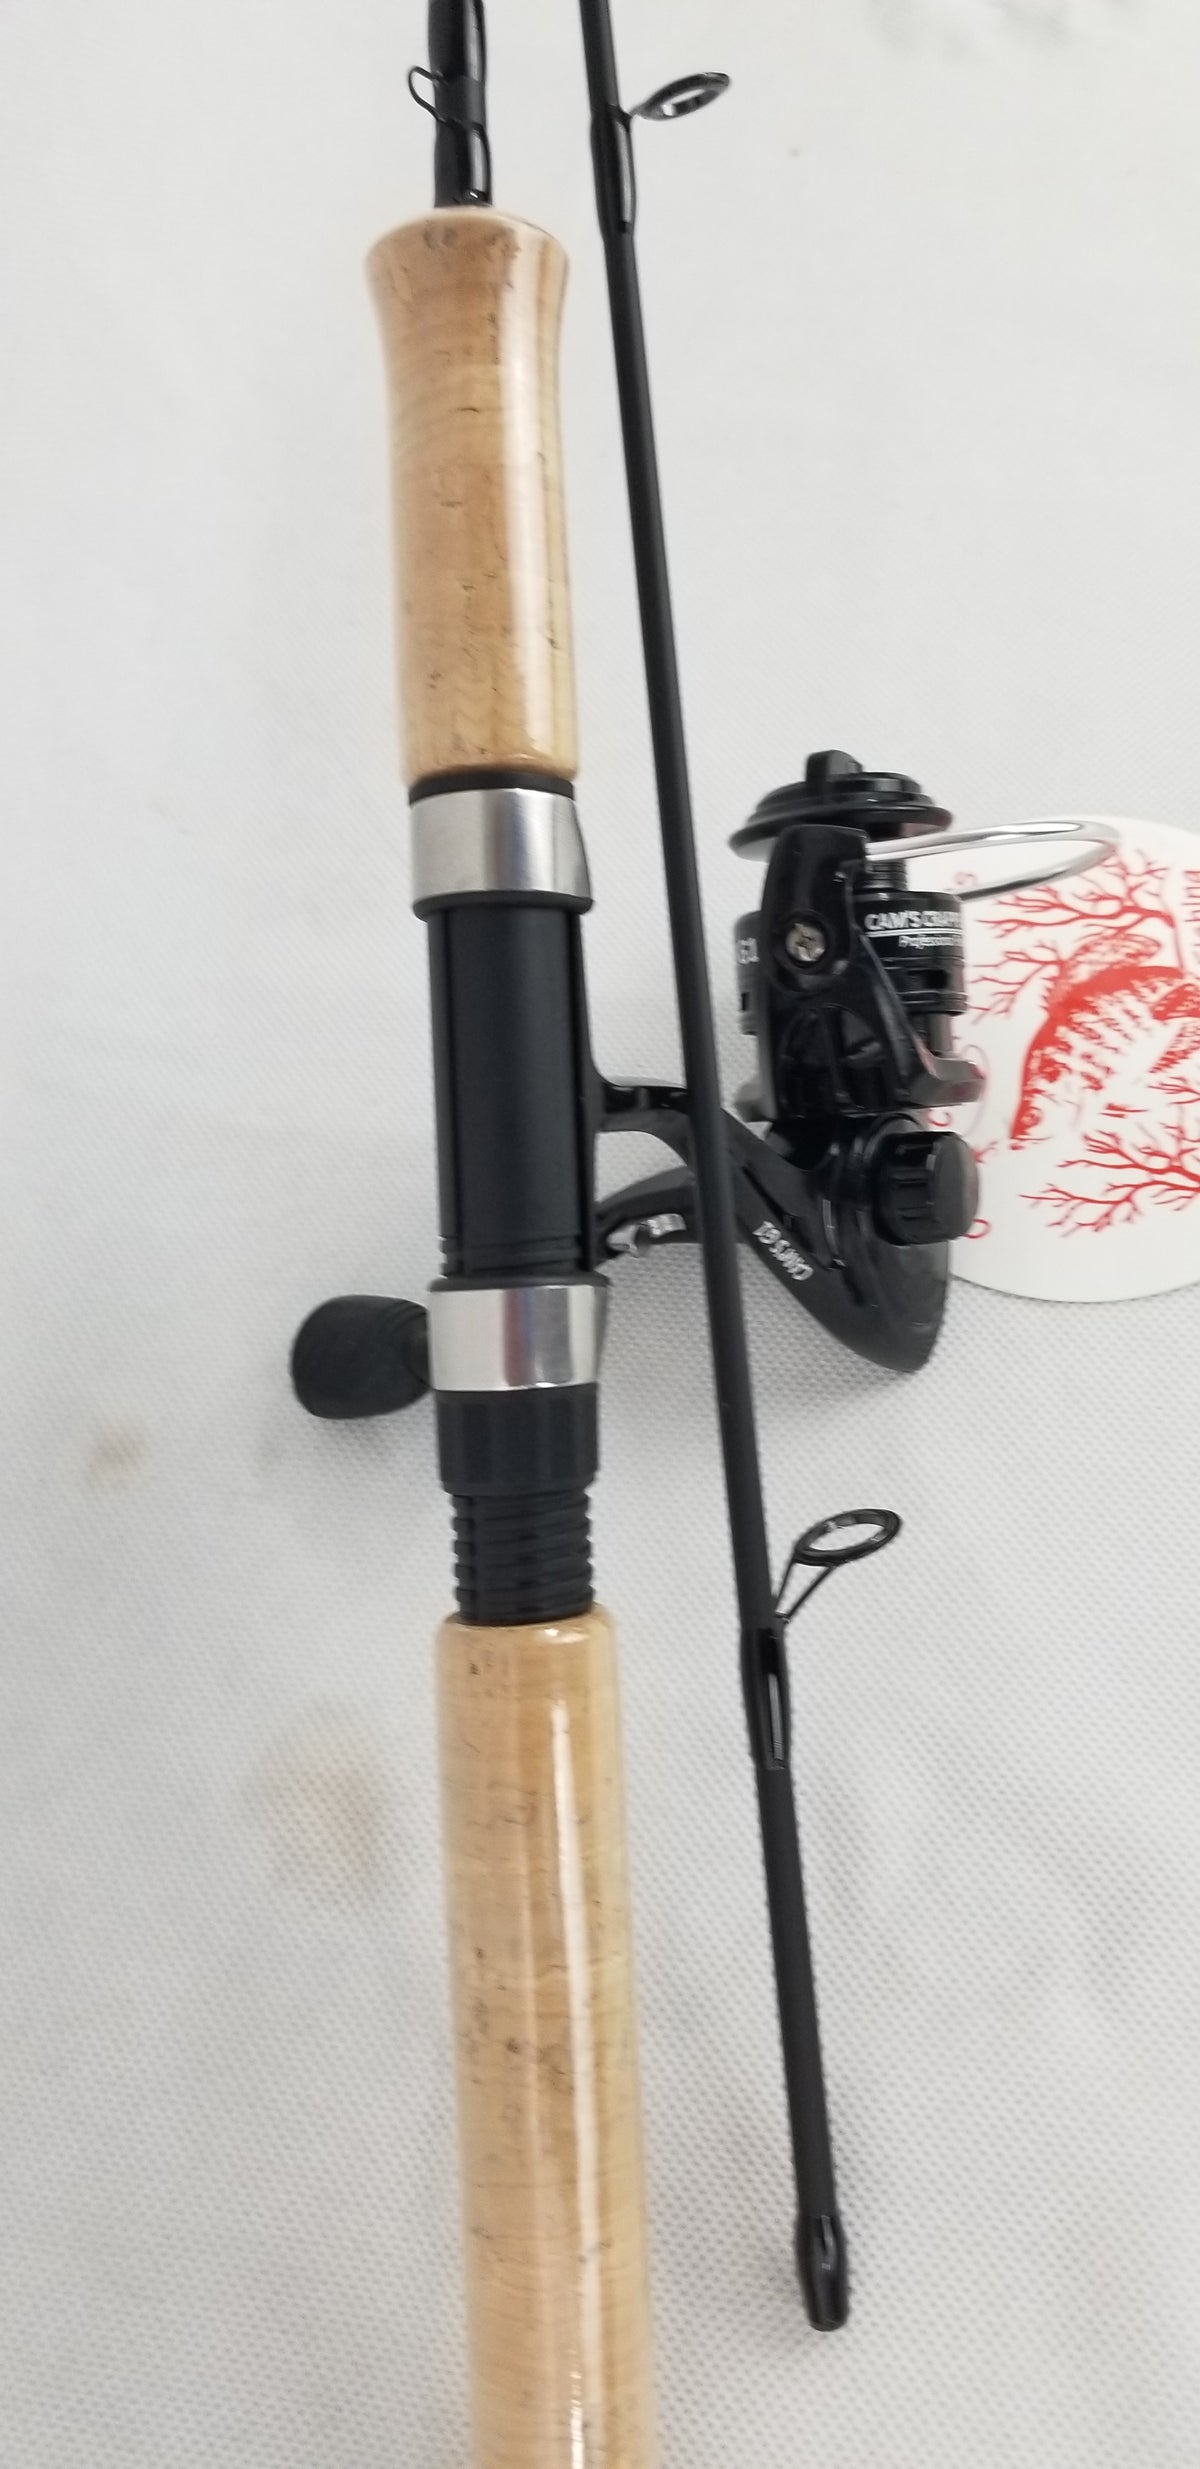 Cam's "Silver Black & Gold" Series Nasty Stik MicroLite Rod and Reel Combo